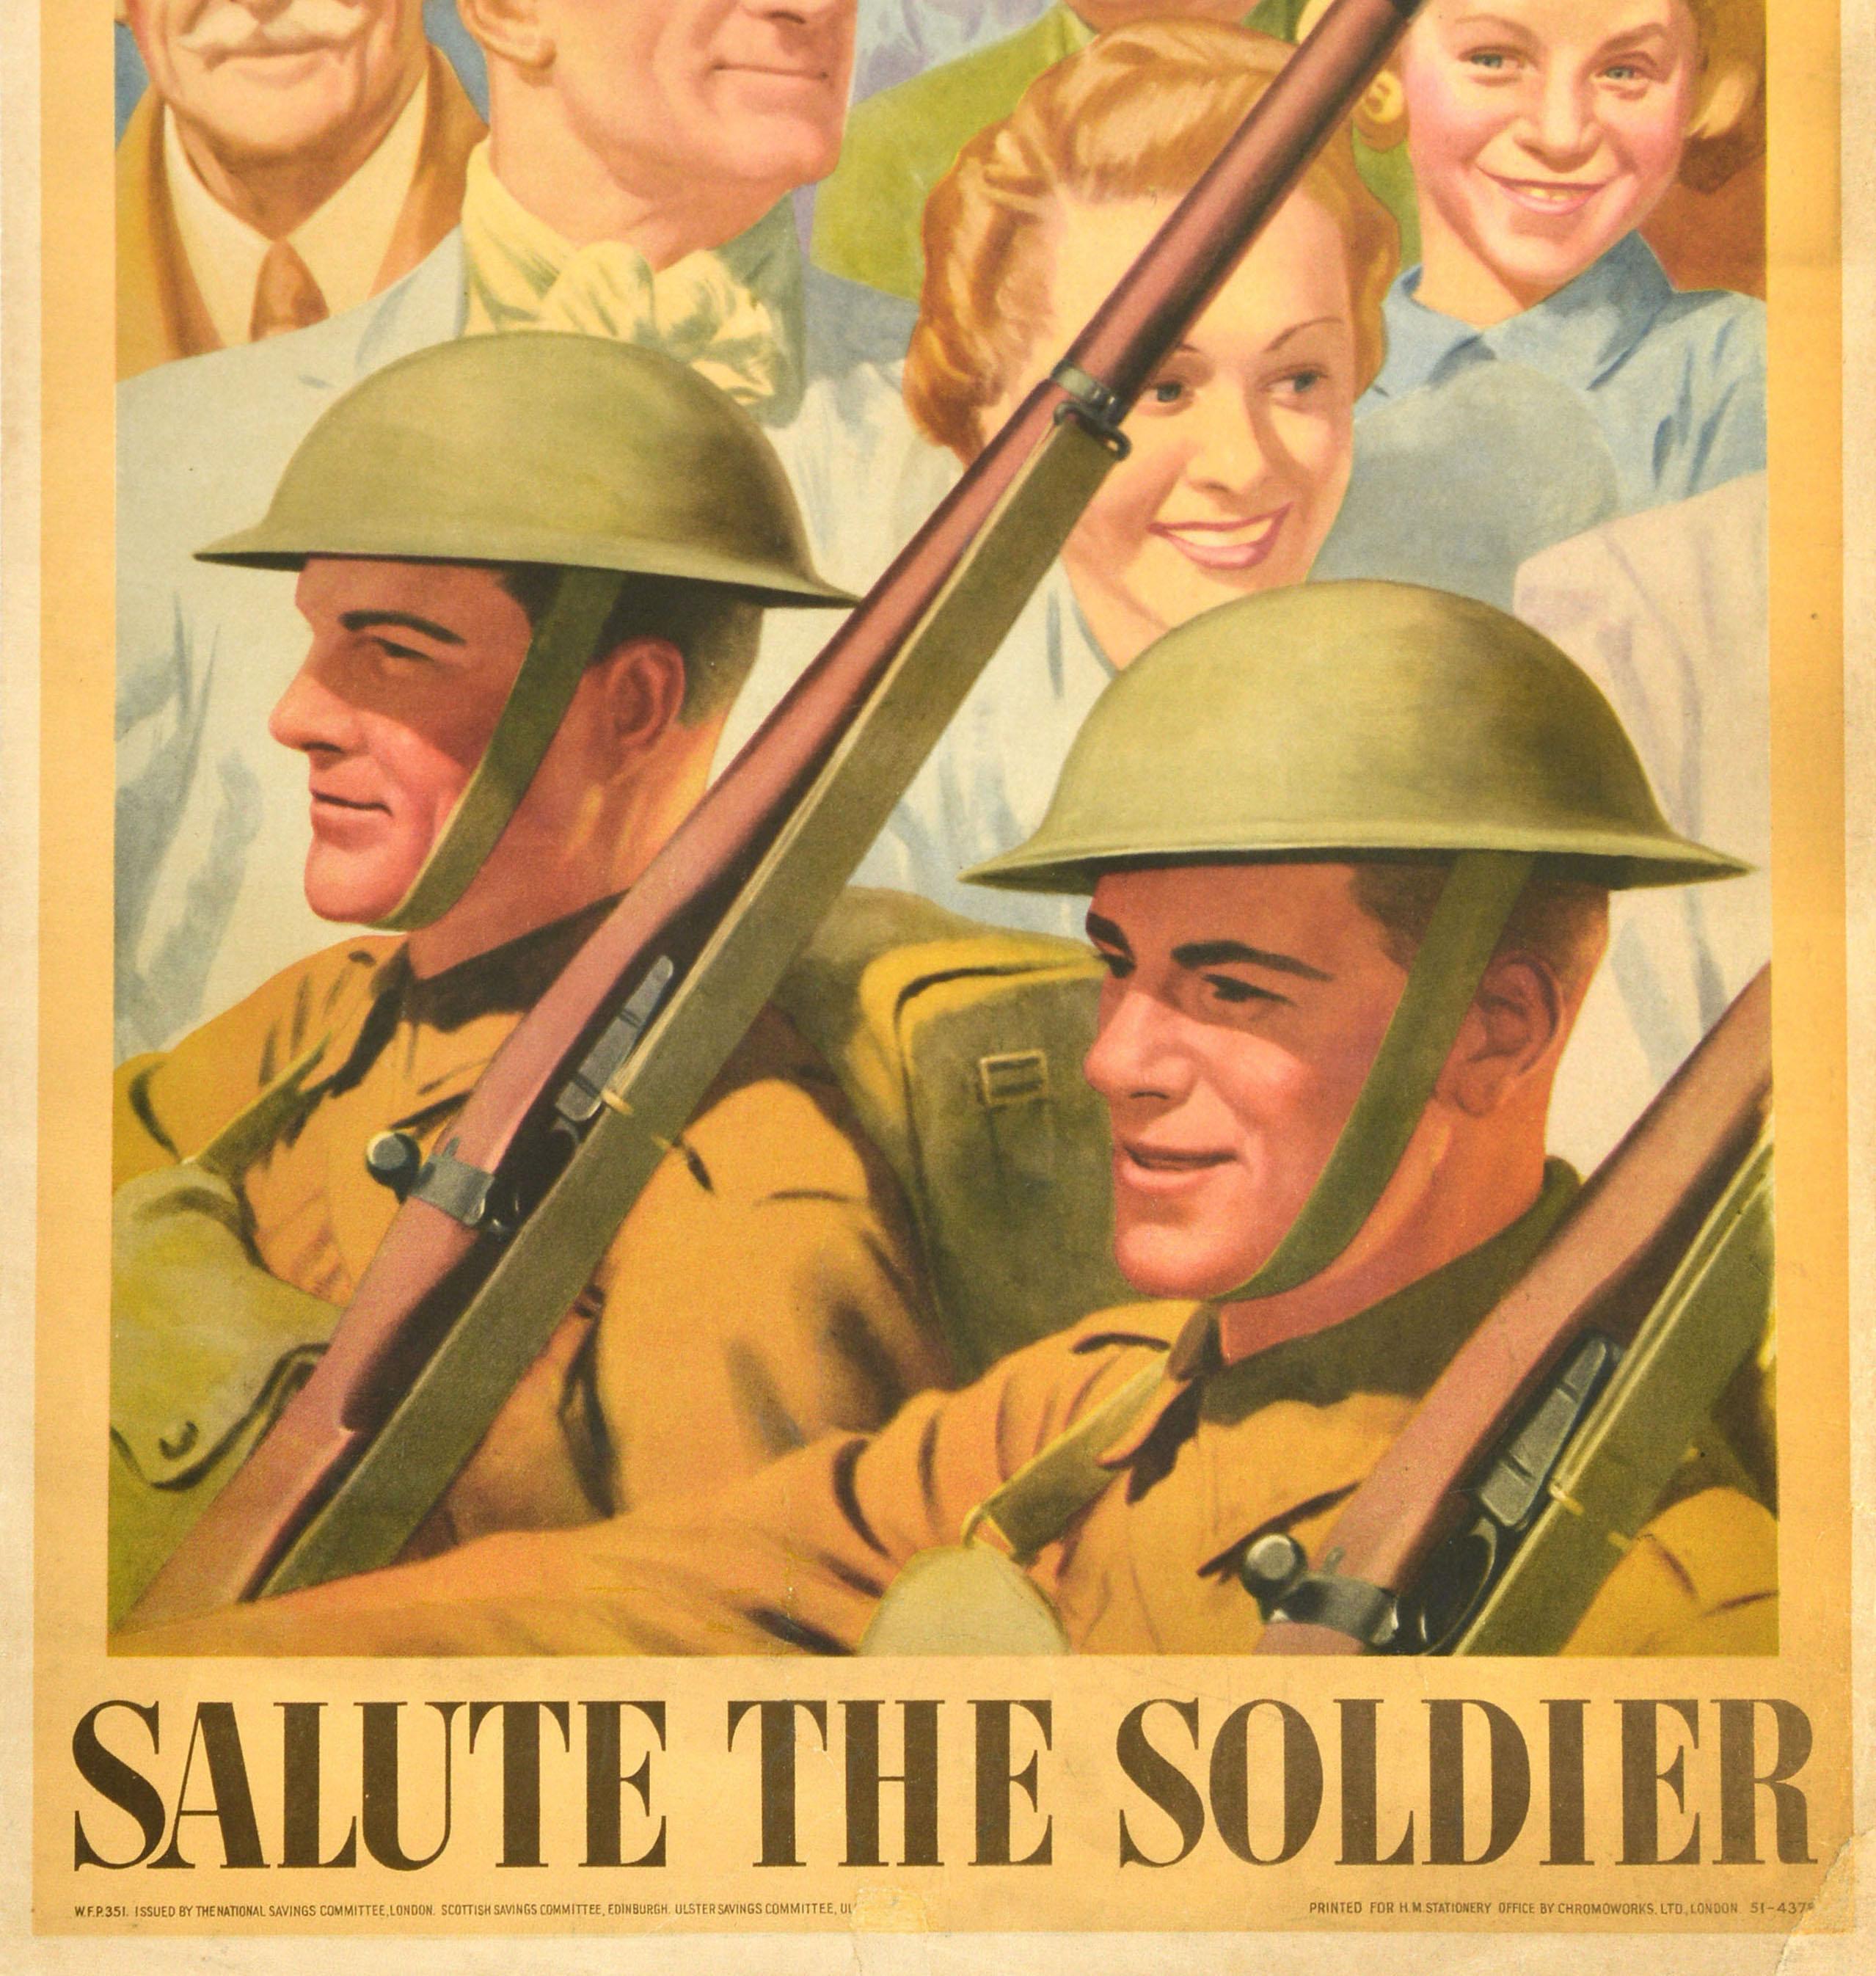 Original Vintage War Poster Salute The Soldier WWII National Savings Home Front For Sale 1